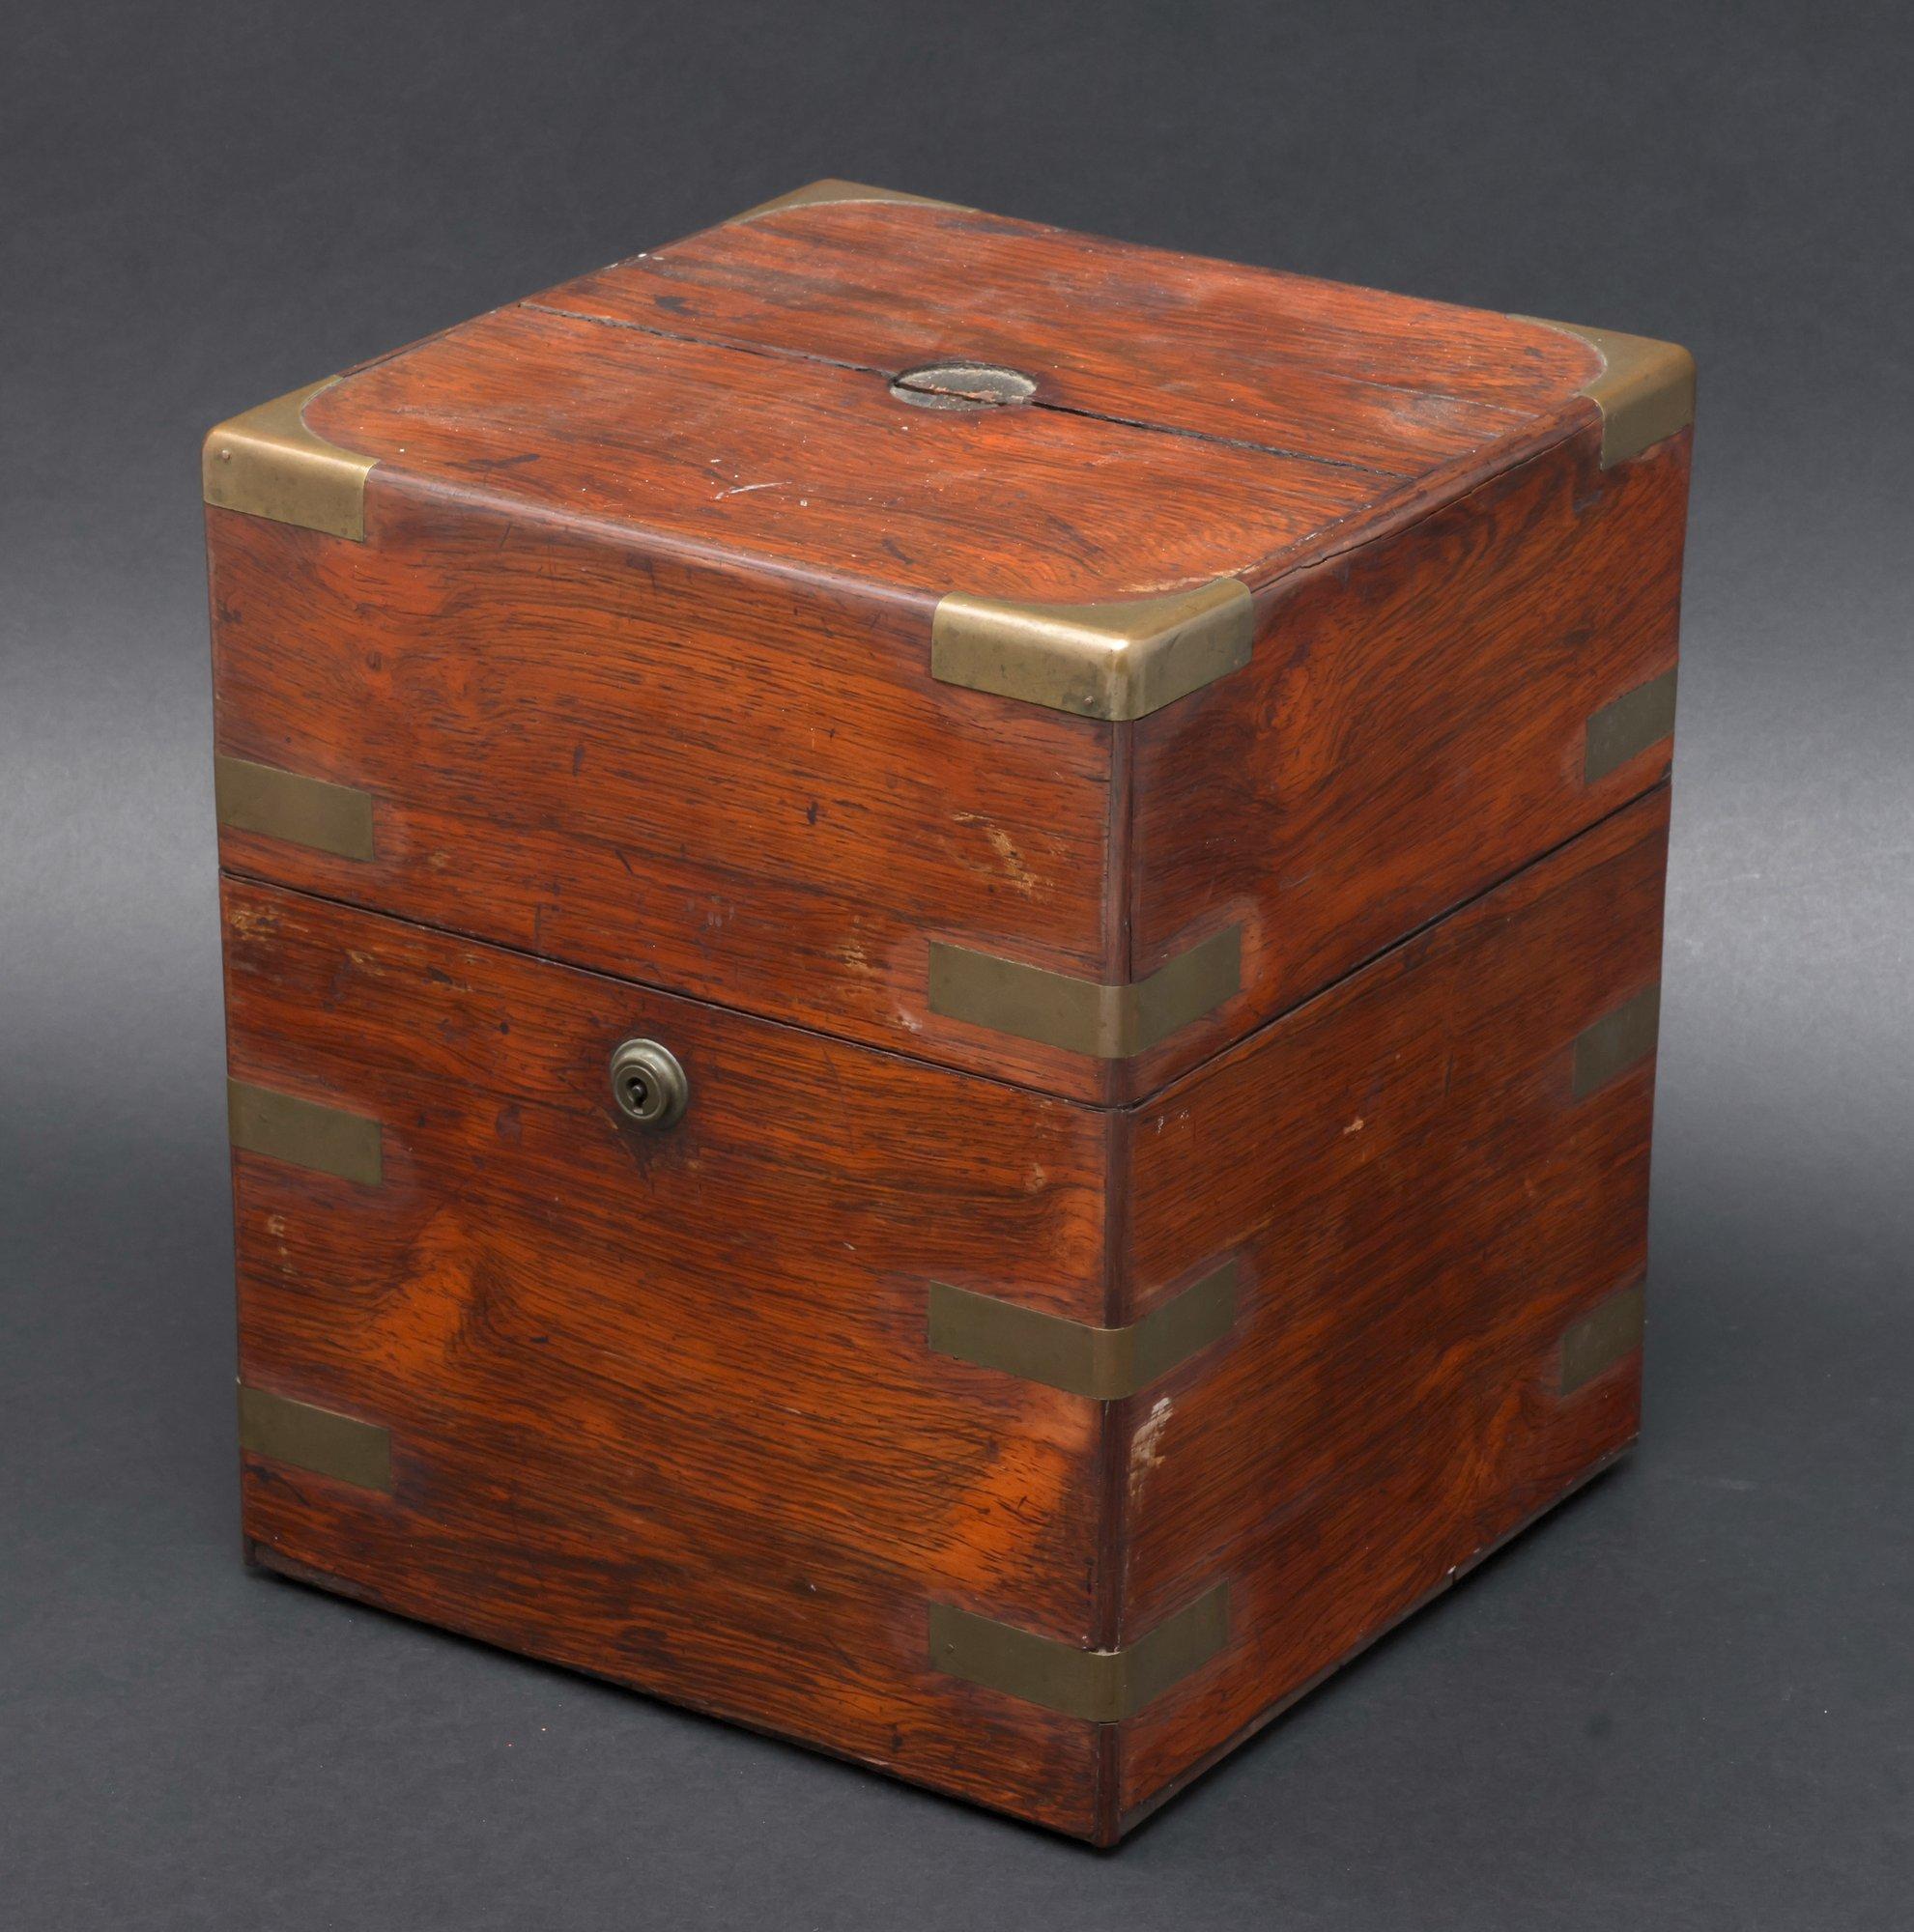 Wooden Case With Decanters Inside